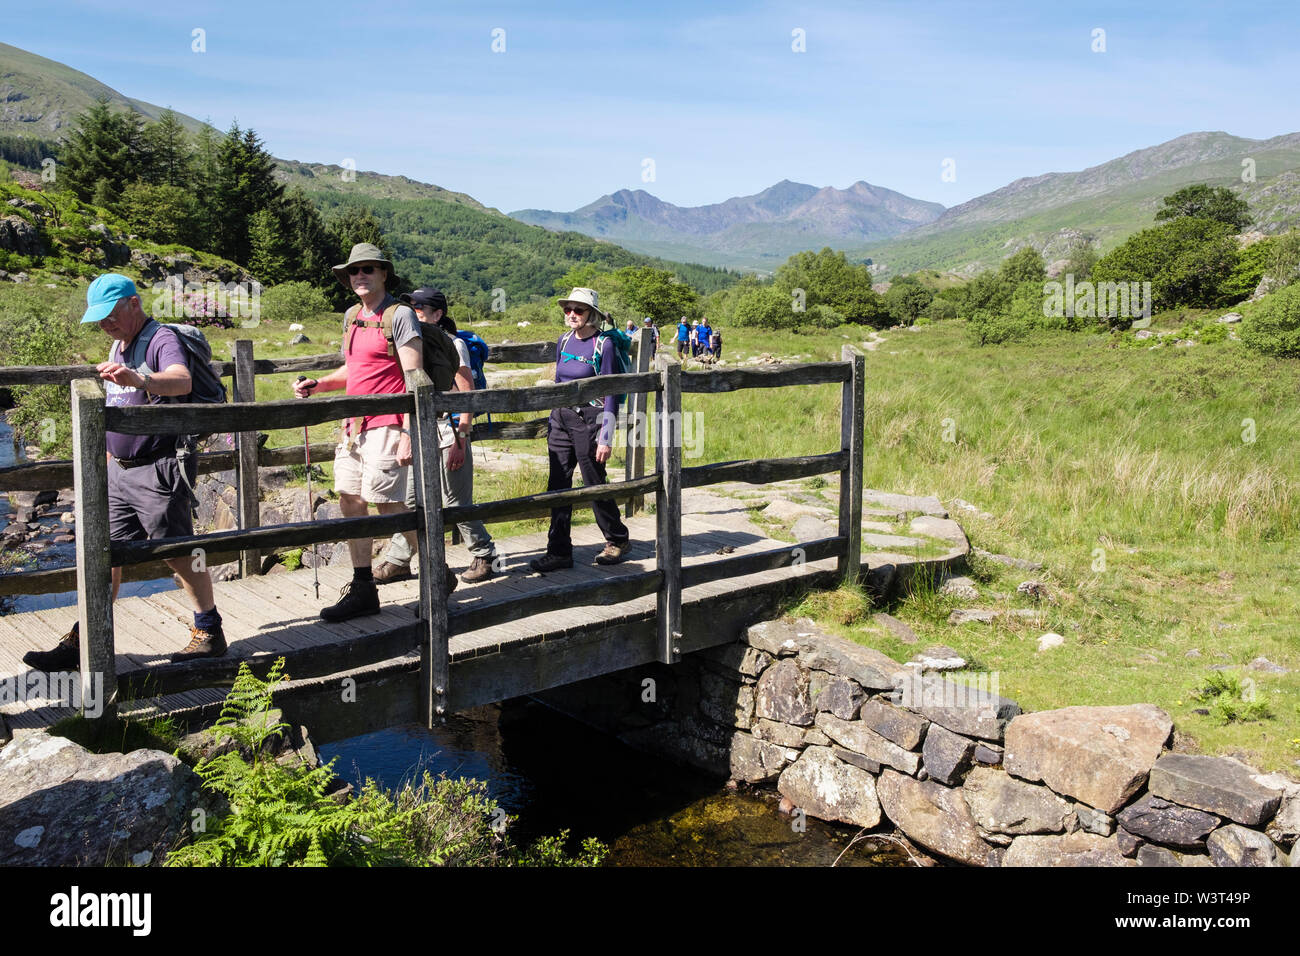 Ramblers crossing a wooden footbridge over a stream on a footpath in Snowdonia National Park. Capel Curig, Conwy, North Wales, UK, Britain Stock Photo